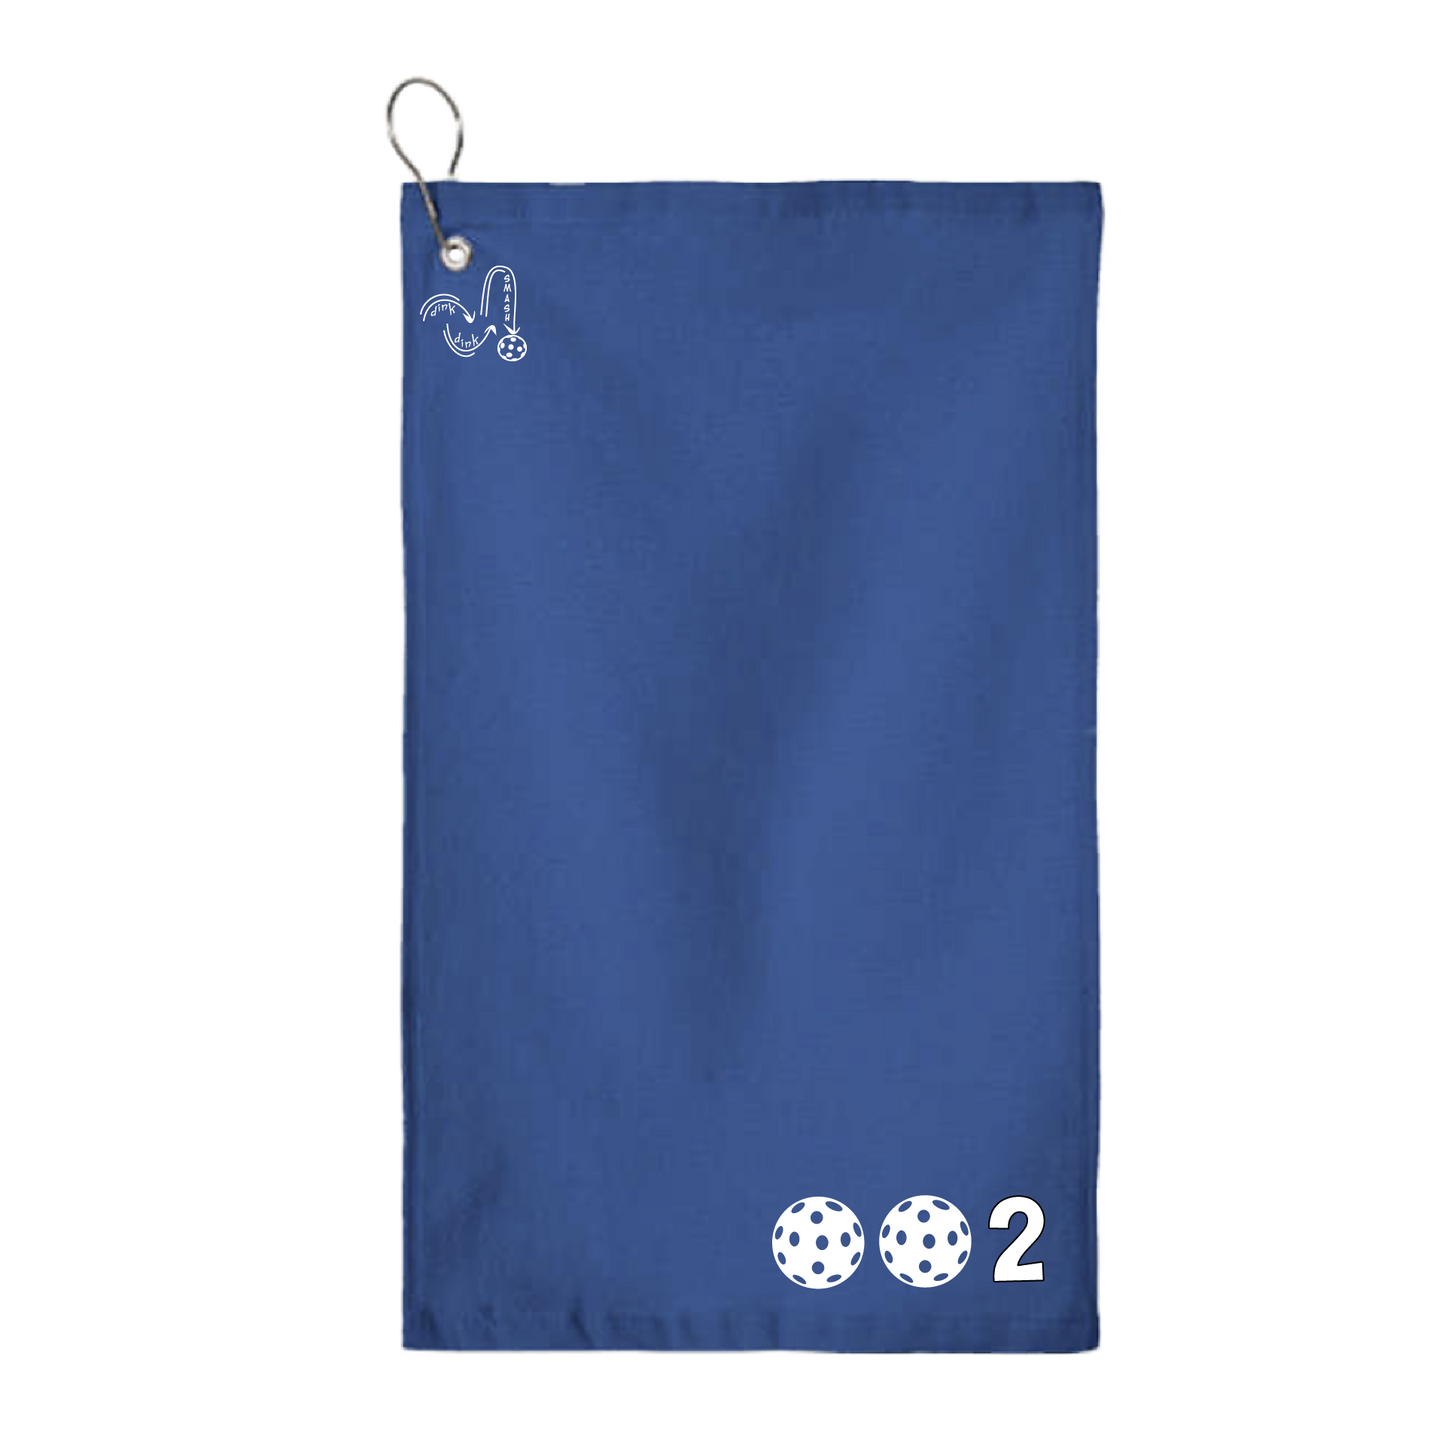 This pickleball towel is crafted with cotton terry velour for optimal performance. It features grommets, hooks, and hemmed edges for added durability. It's perfect for completing your pickleball gear, and an ideal gift for friends and tournaments. The towel is designed to be both absorbent and lightweight, so you can remain dry and comfortable while you play